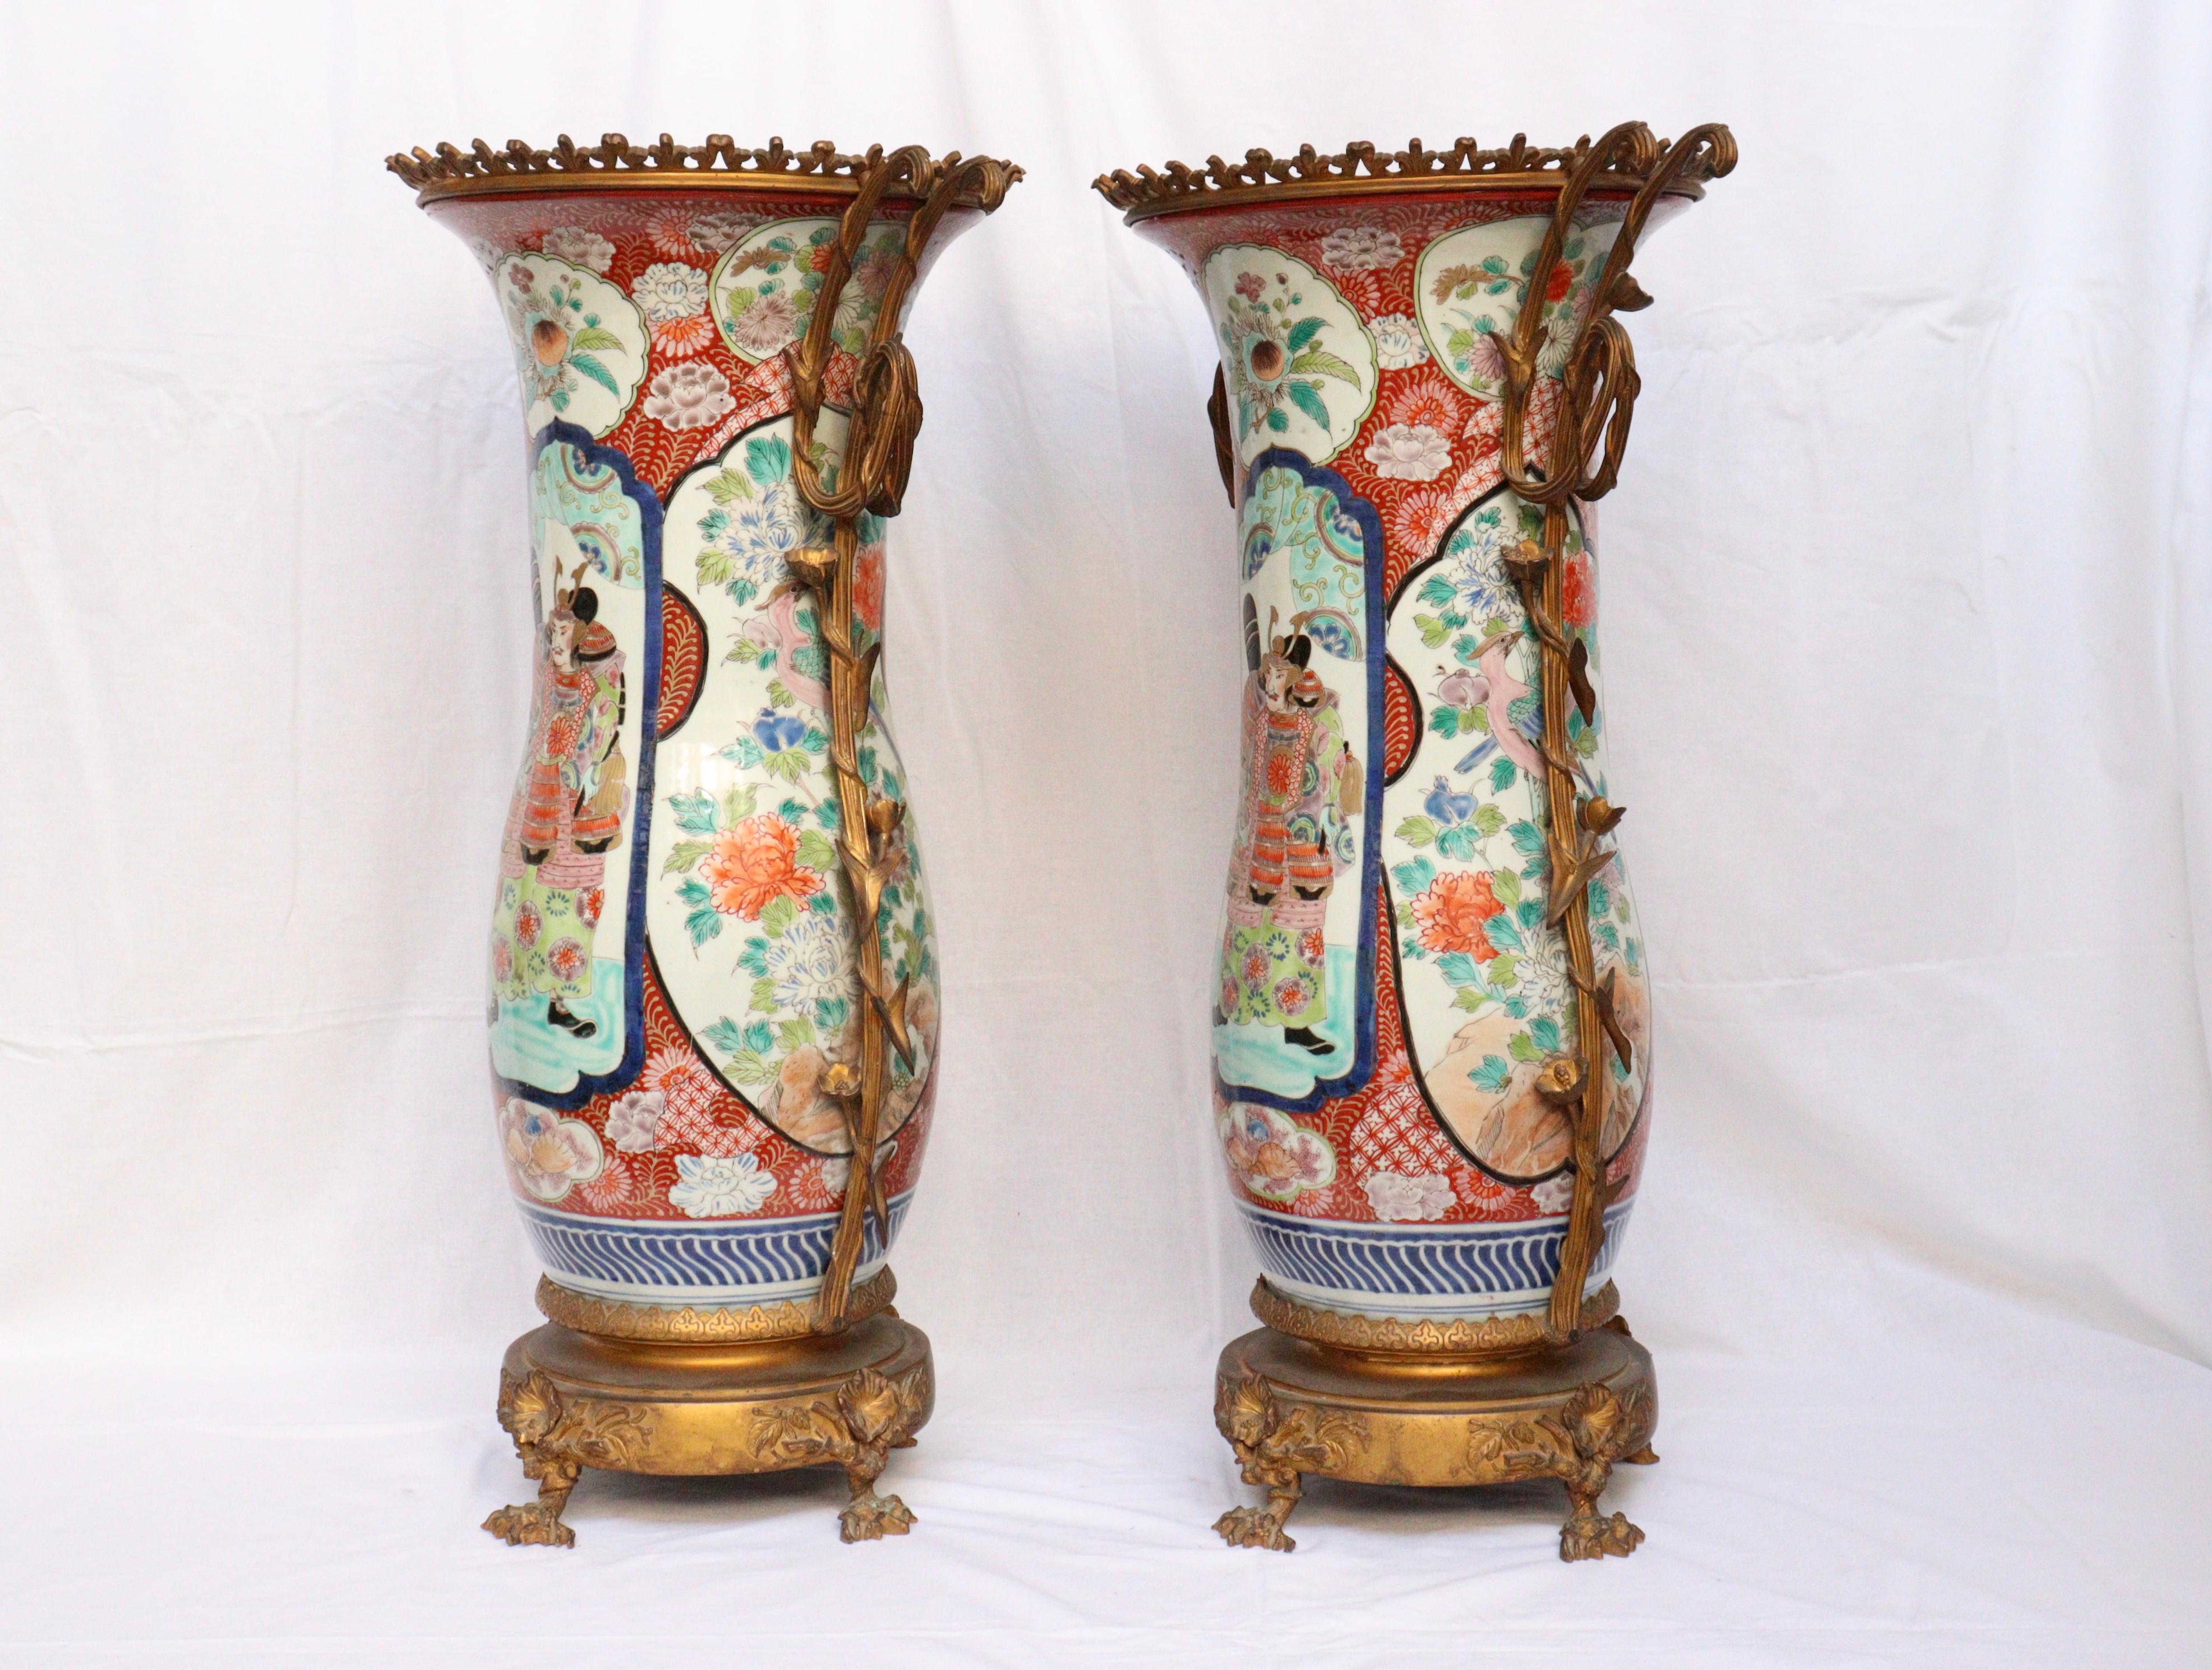 French 19th Century Japanese Porcelain and Ormolu-Mounted Pair of Vases